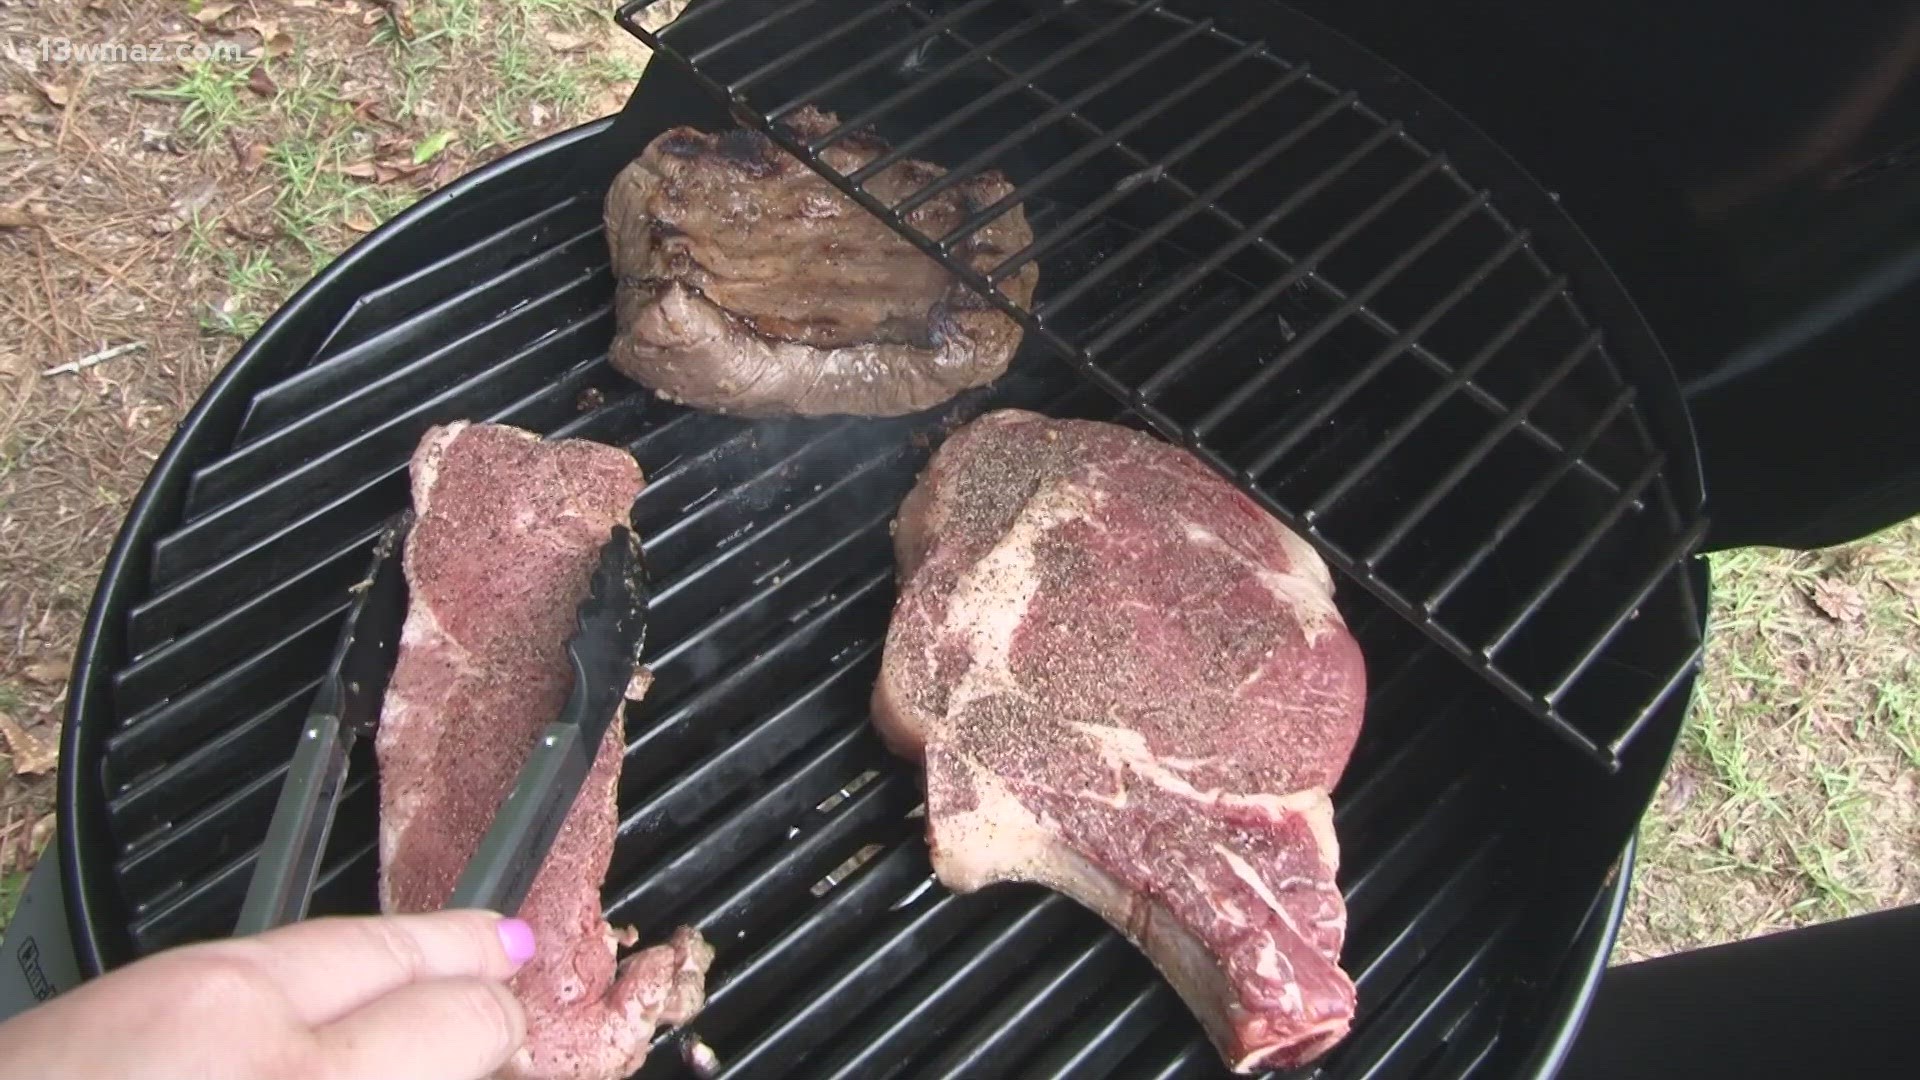 Taylor Evans with the Georgia Beef Board explains how to grill your steaks like a pro on this Memorial Day weekend.